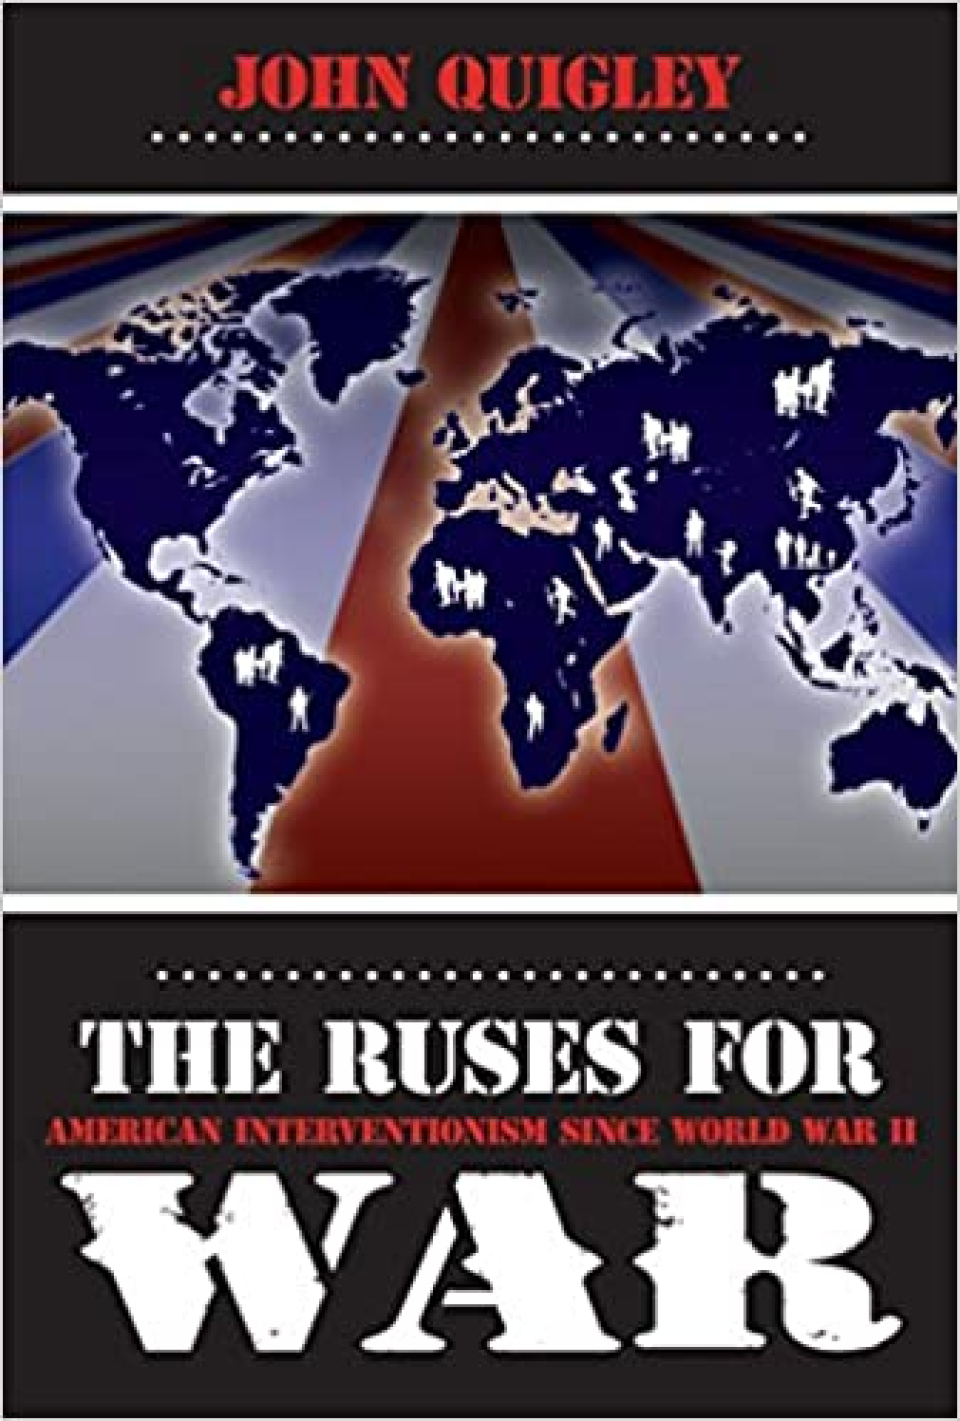 Book of Week: The Ruses for War: American Interventionism Since World War II